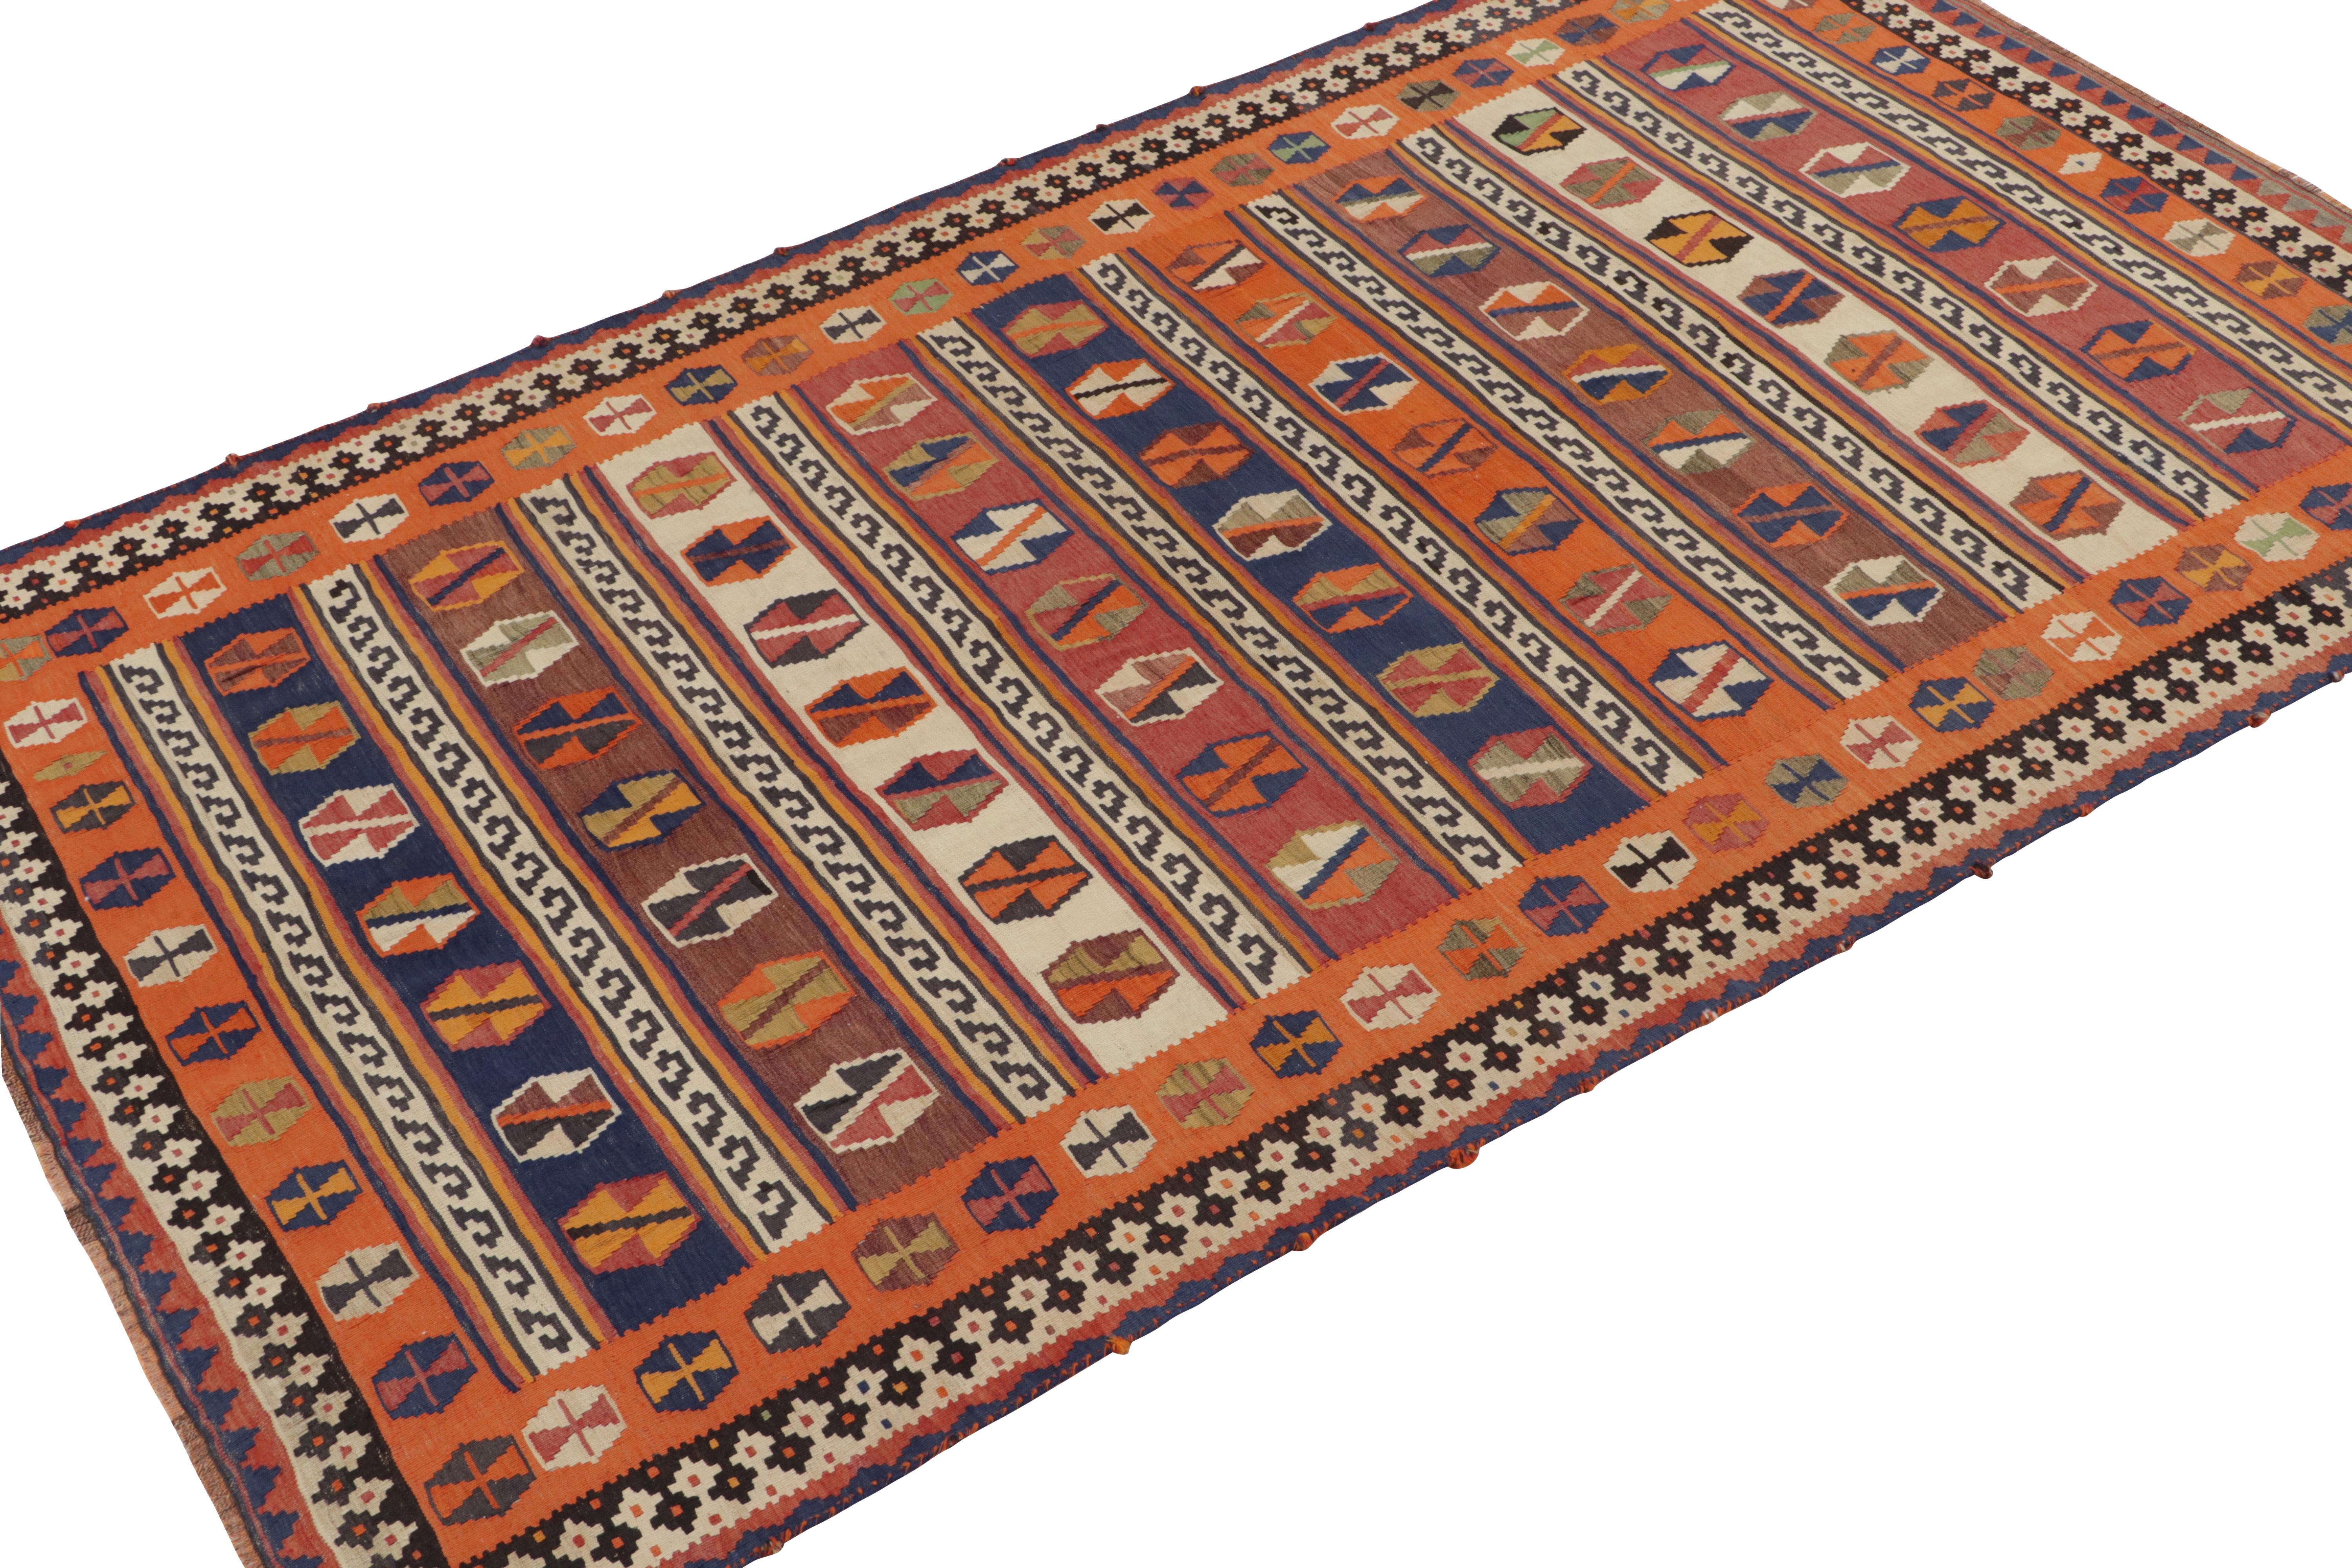 Tribal Vintage Qashqai Persian Kilim in Orange with Geometric Patterns For Sale